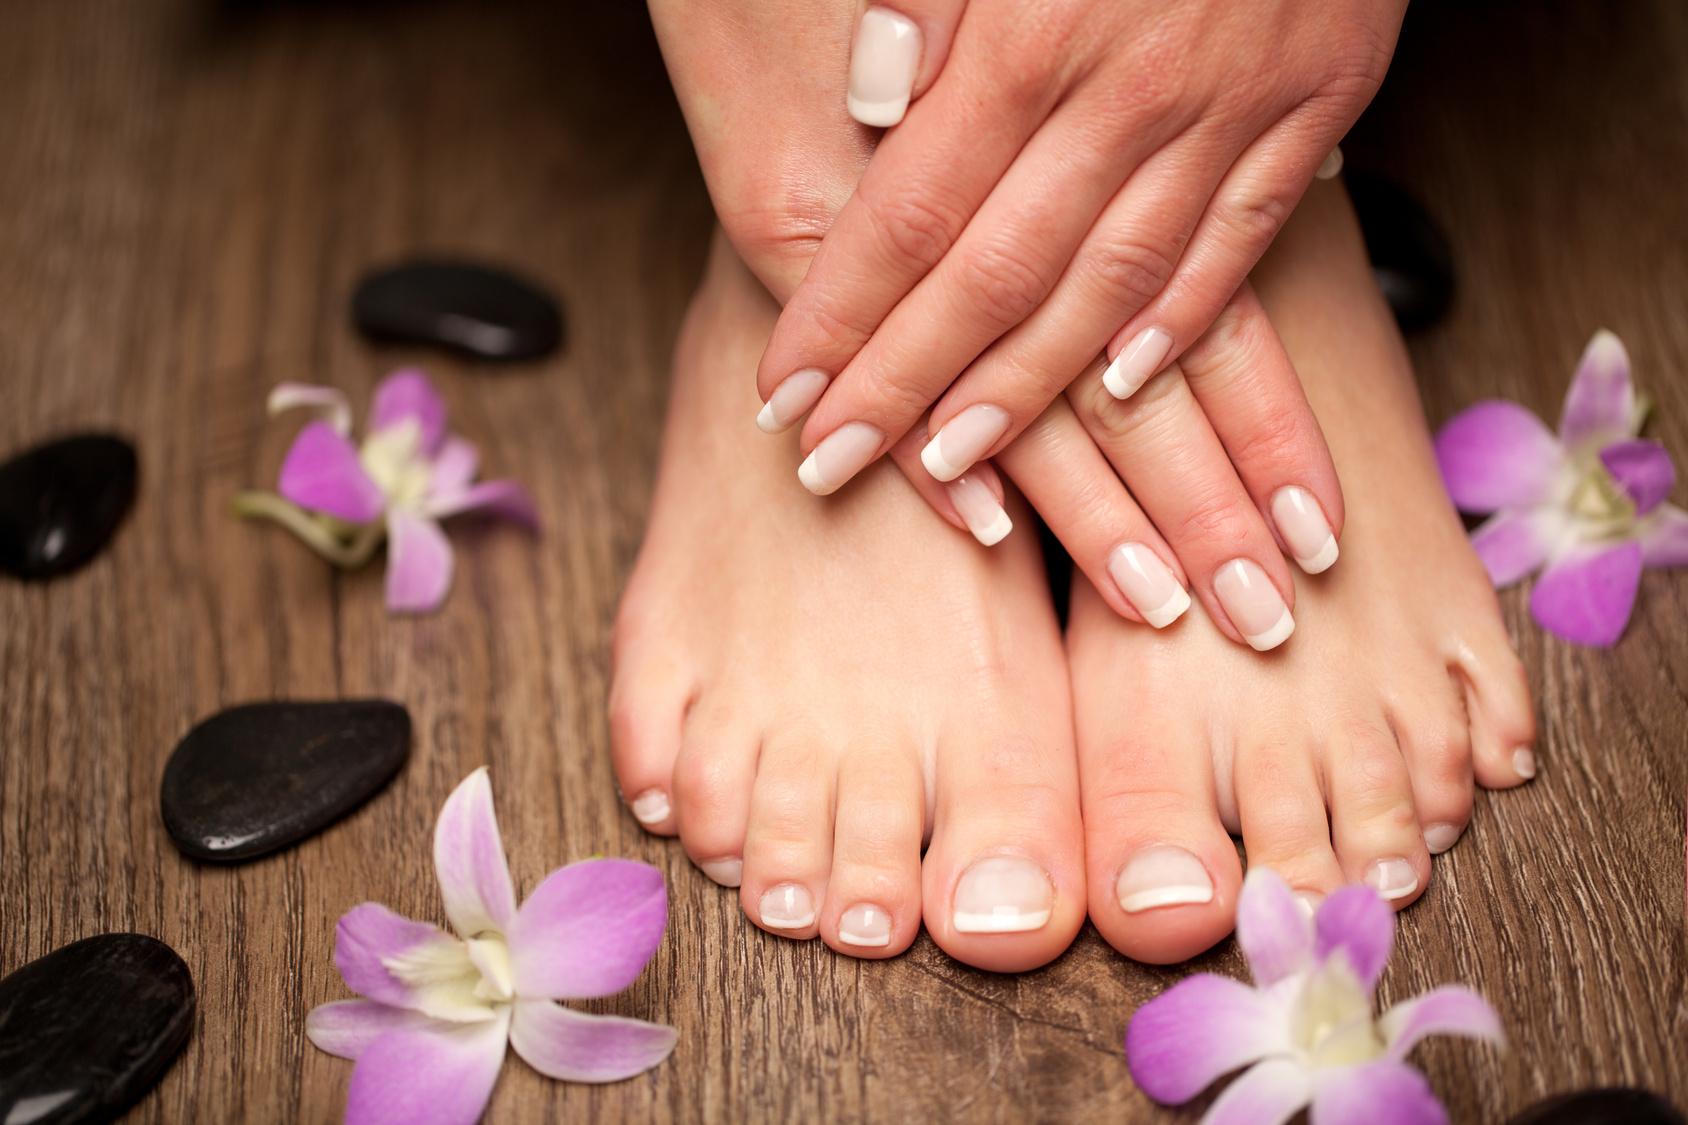 1. "Best Winter Nail Colors for a Perfect Pedicure" - wide 2